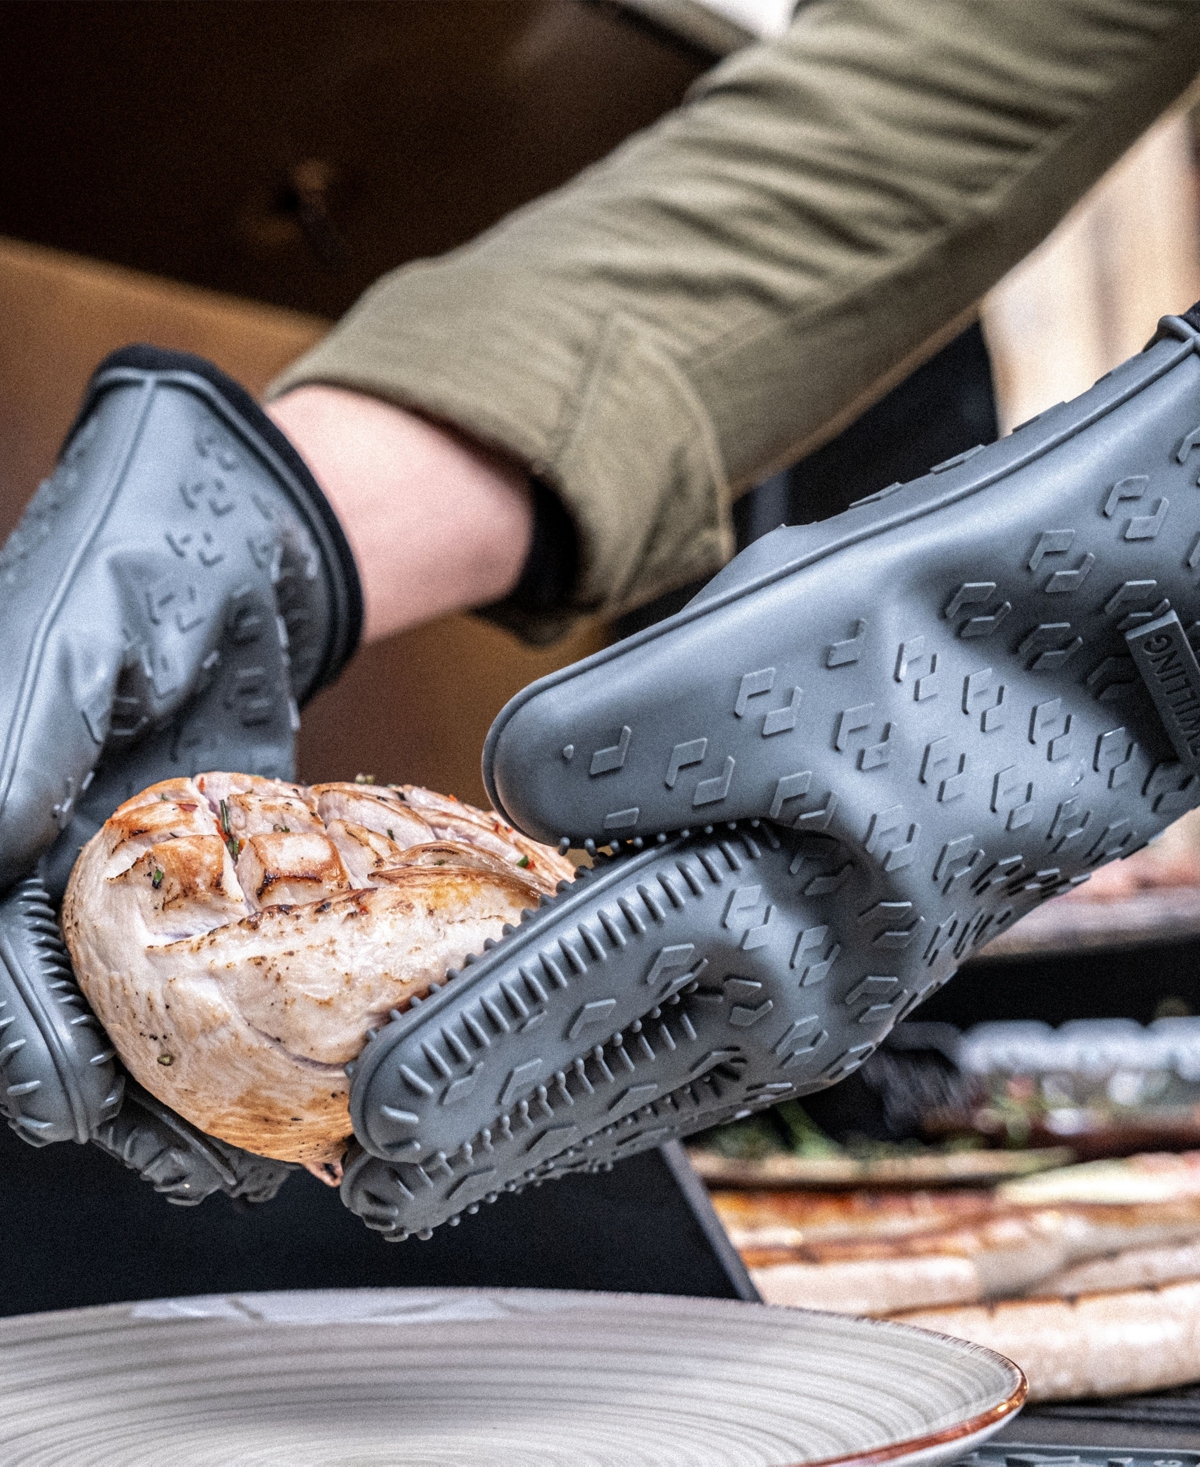 Shop Zwilling Bbq Silicone Gloves In Charcoal